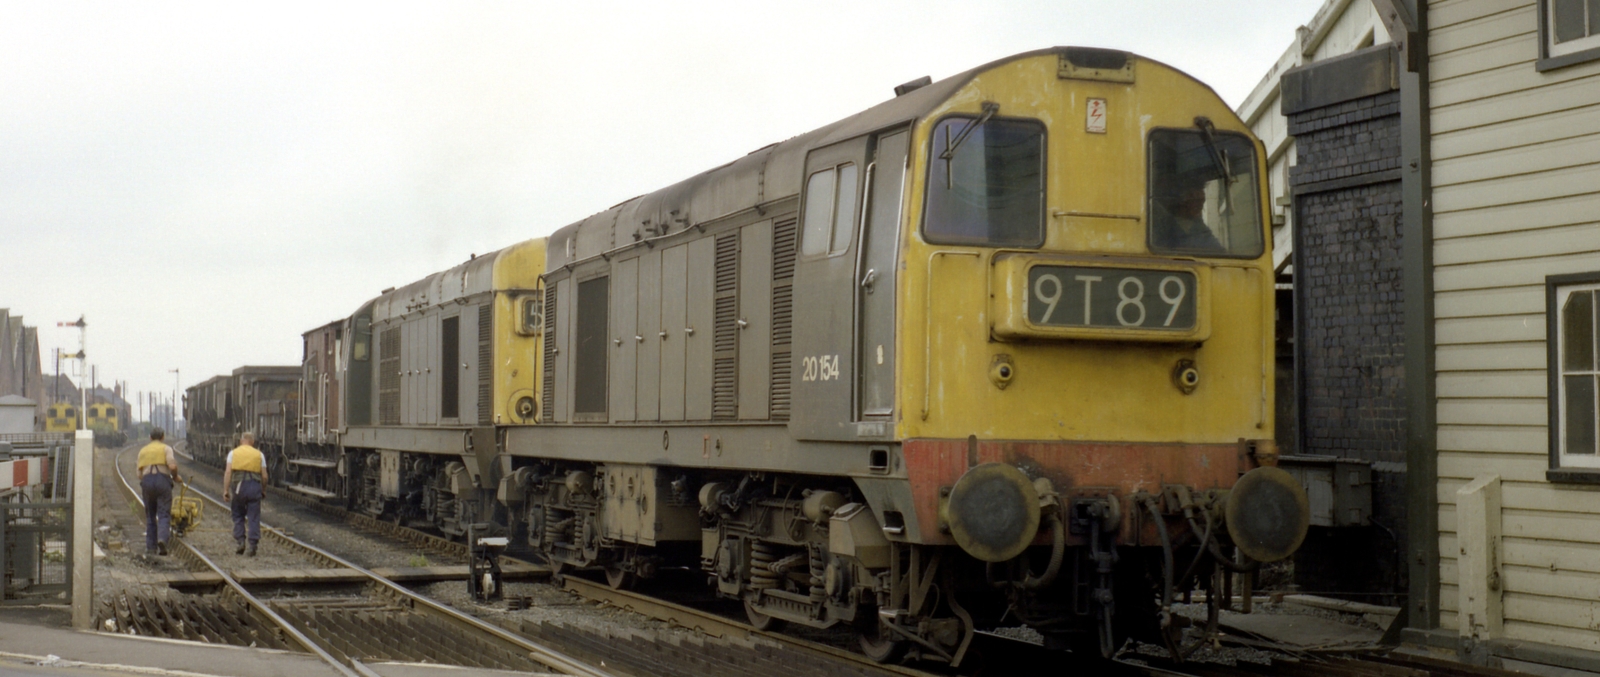 20154 and 20155 forming one of the typical pairs in July 1975 in Coalville